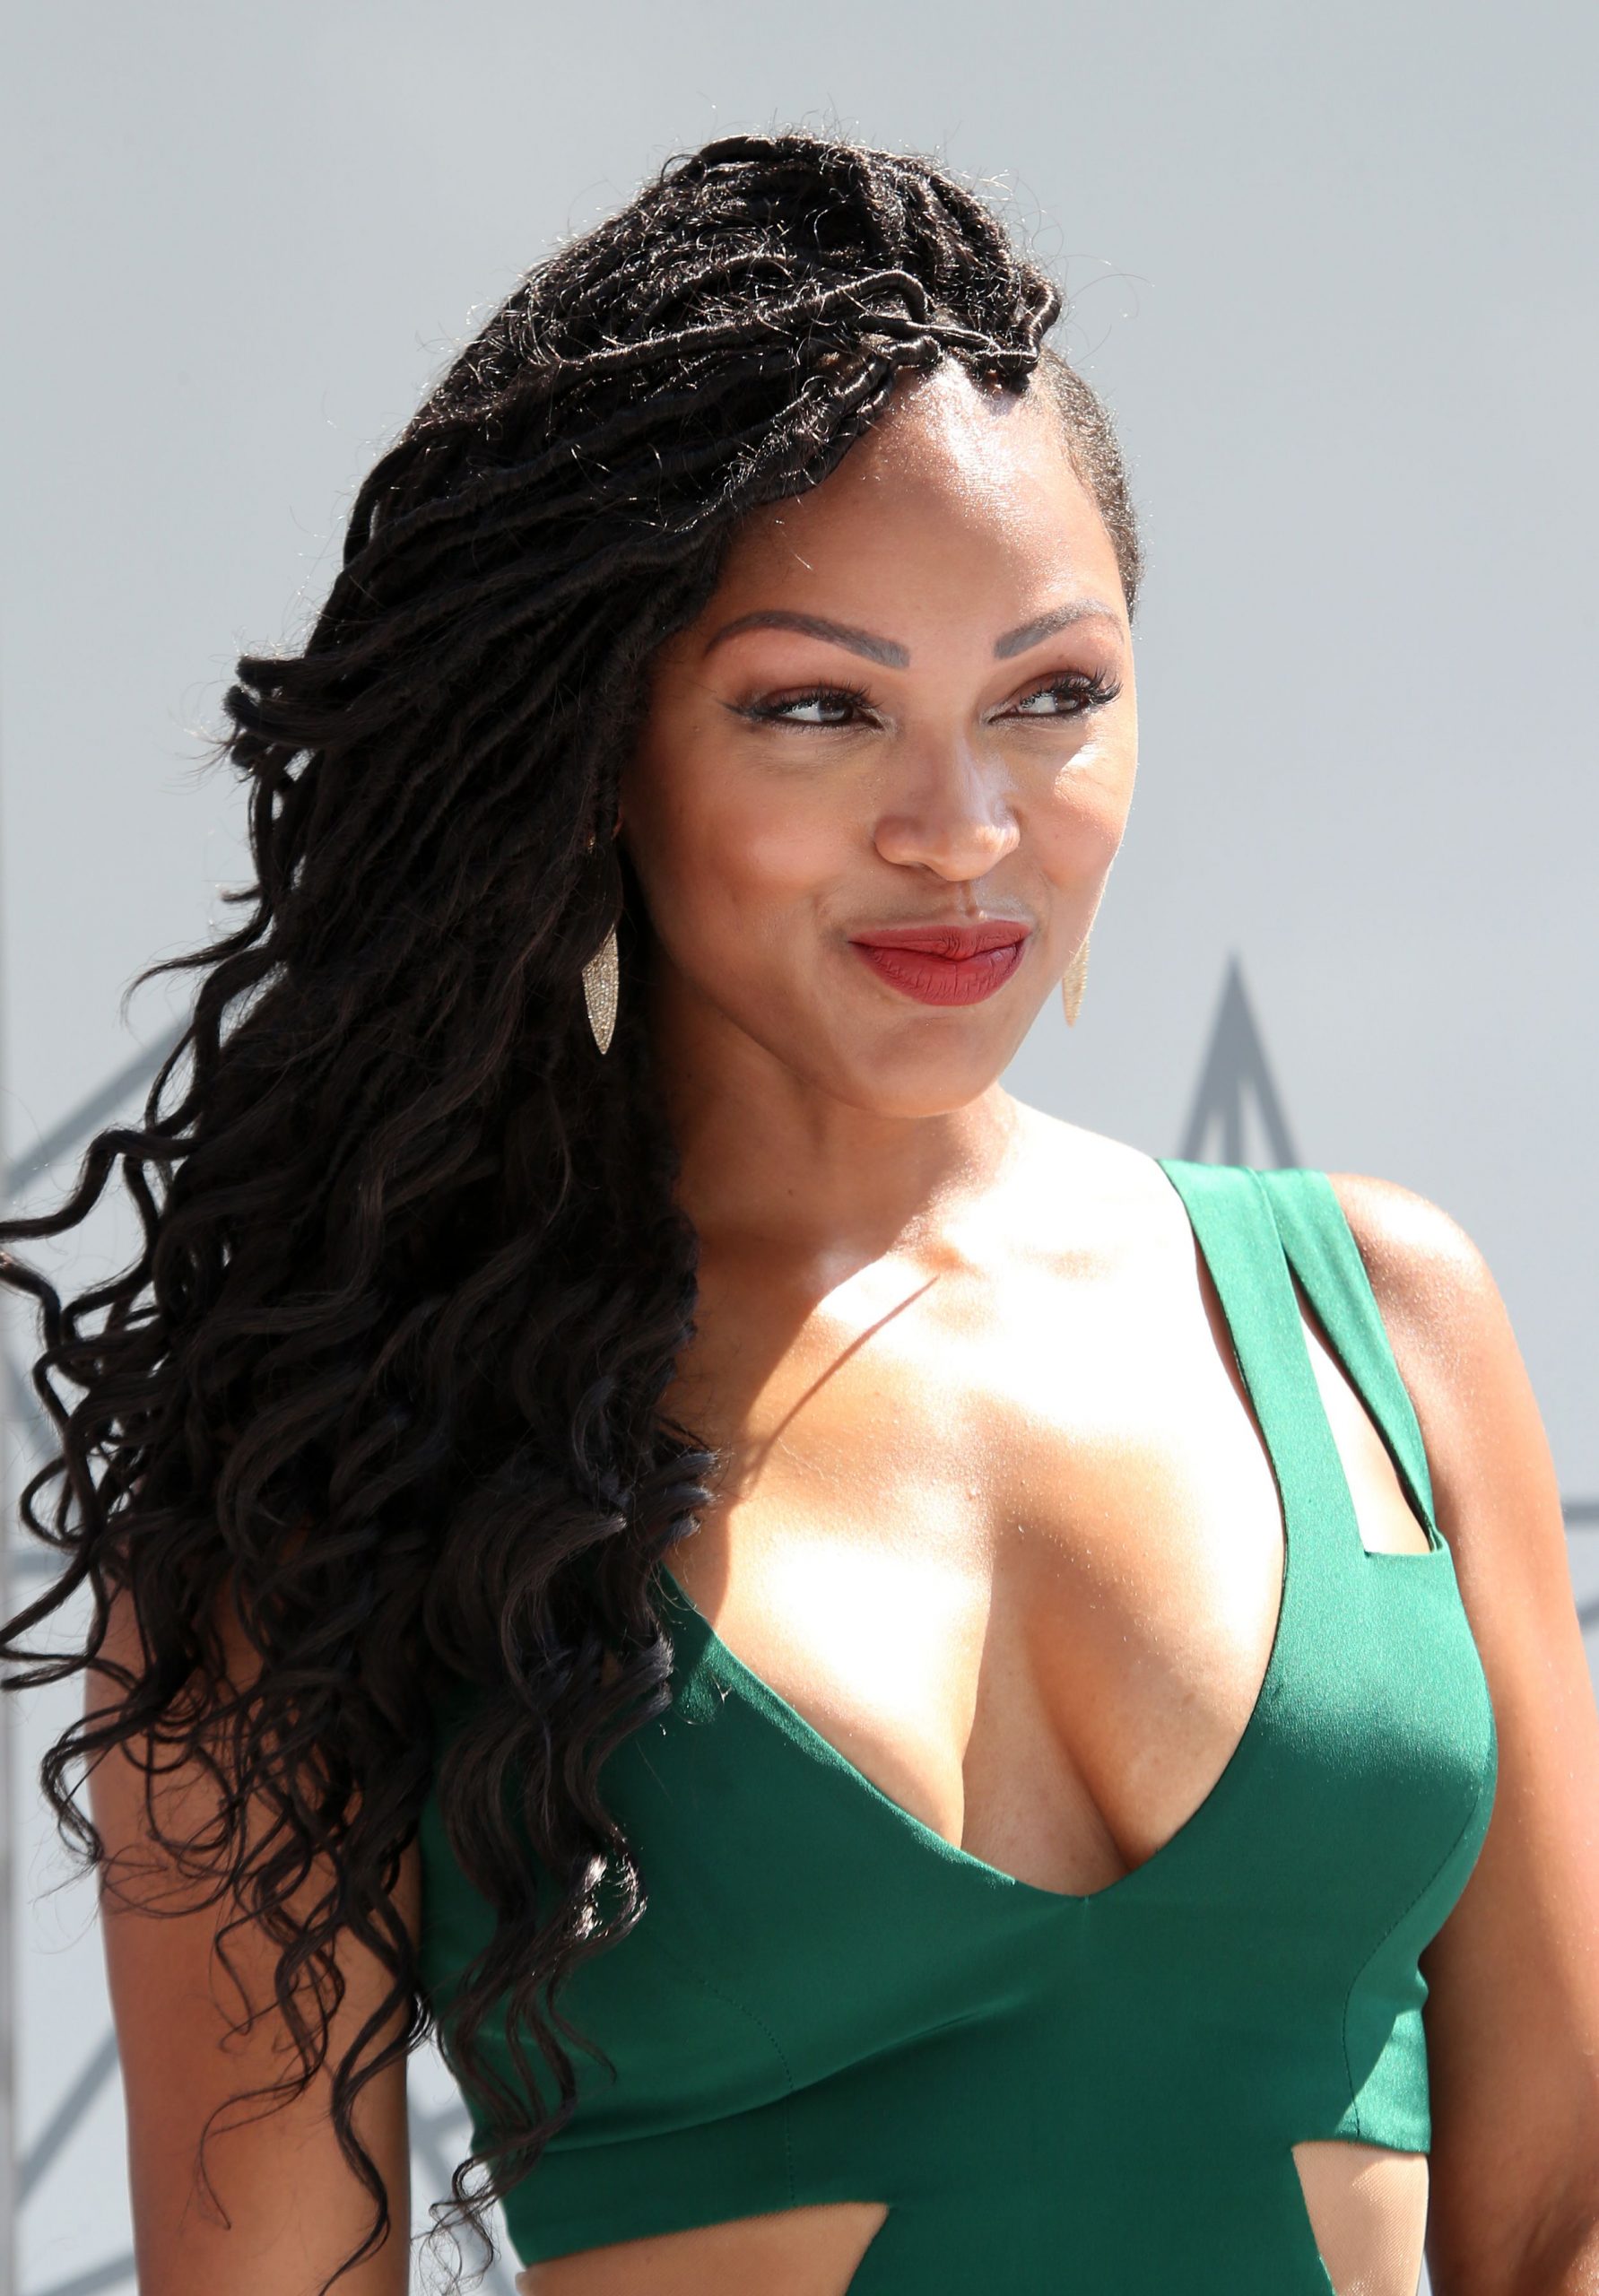 Awesome Meagan Good Pictures from a Public Event – Celebrity Big Tits Teasing